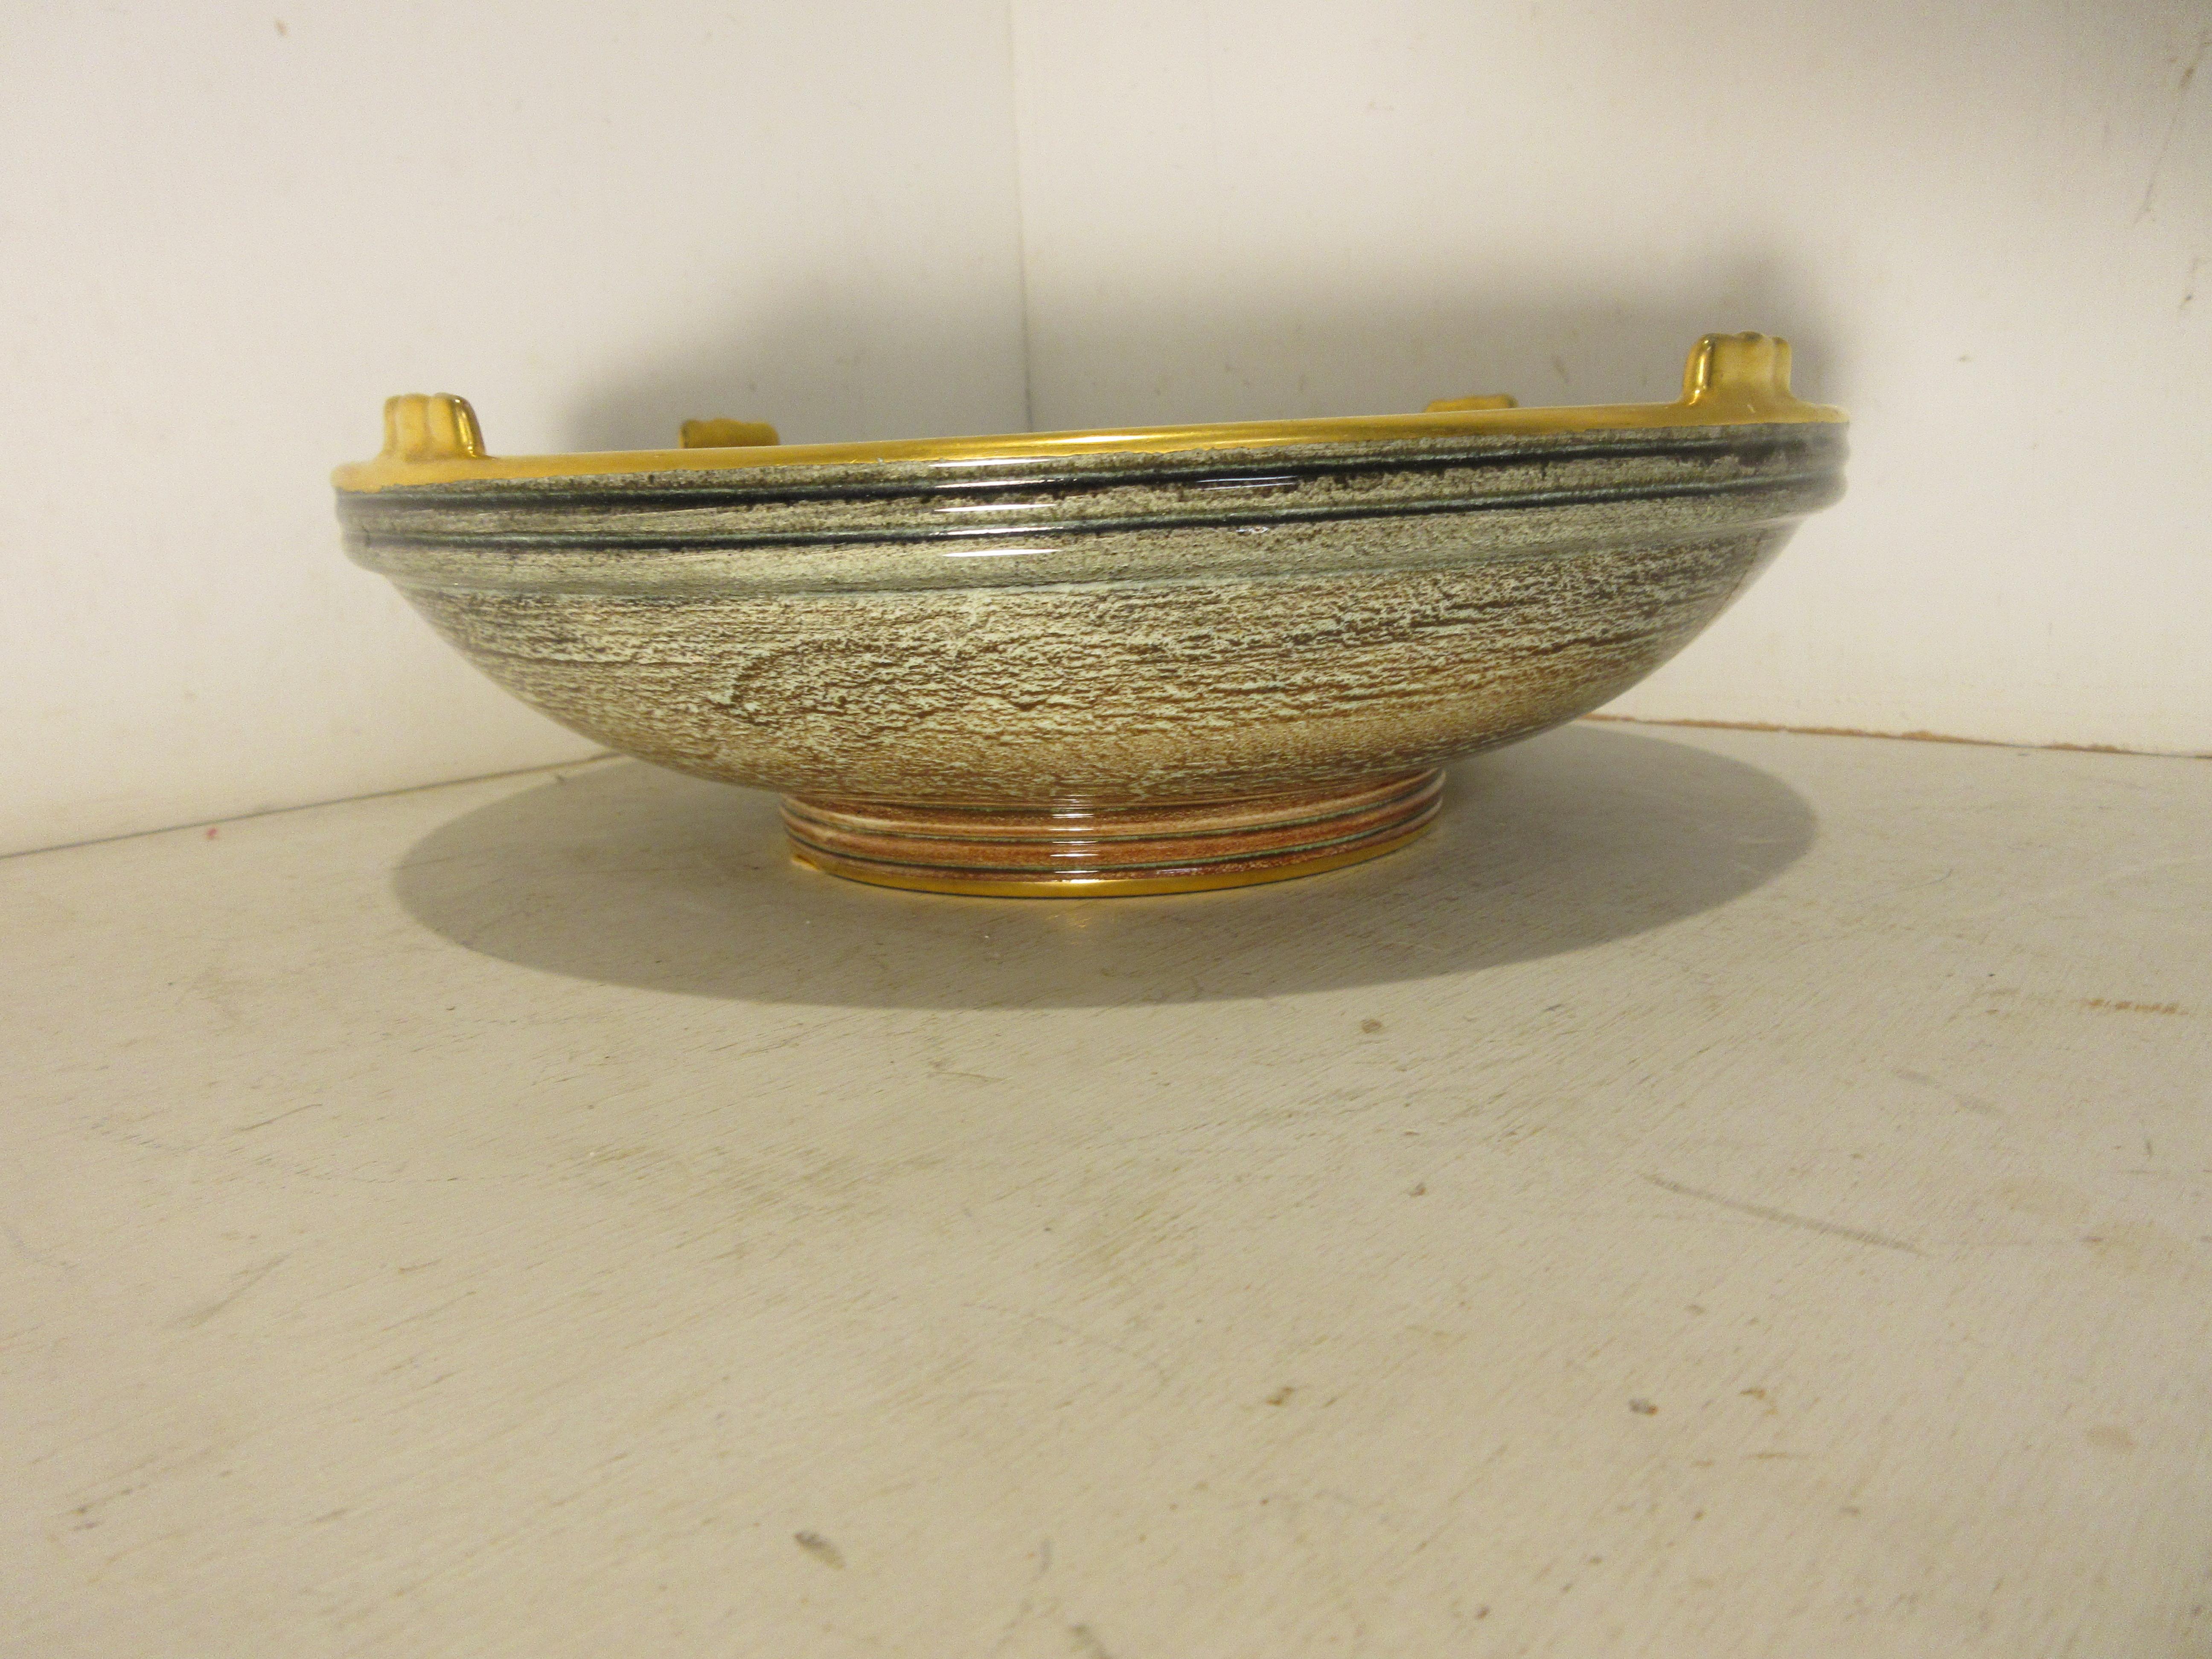 This is a handmade rare Swedish art deco ceramic bowl in light brown and gold luster glaze hand decorated with gold made by the Swedish ceramic artist Josef Ekberg. He was one of Sweden's Top Ceramic artist at the time. He started working at the